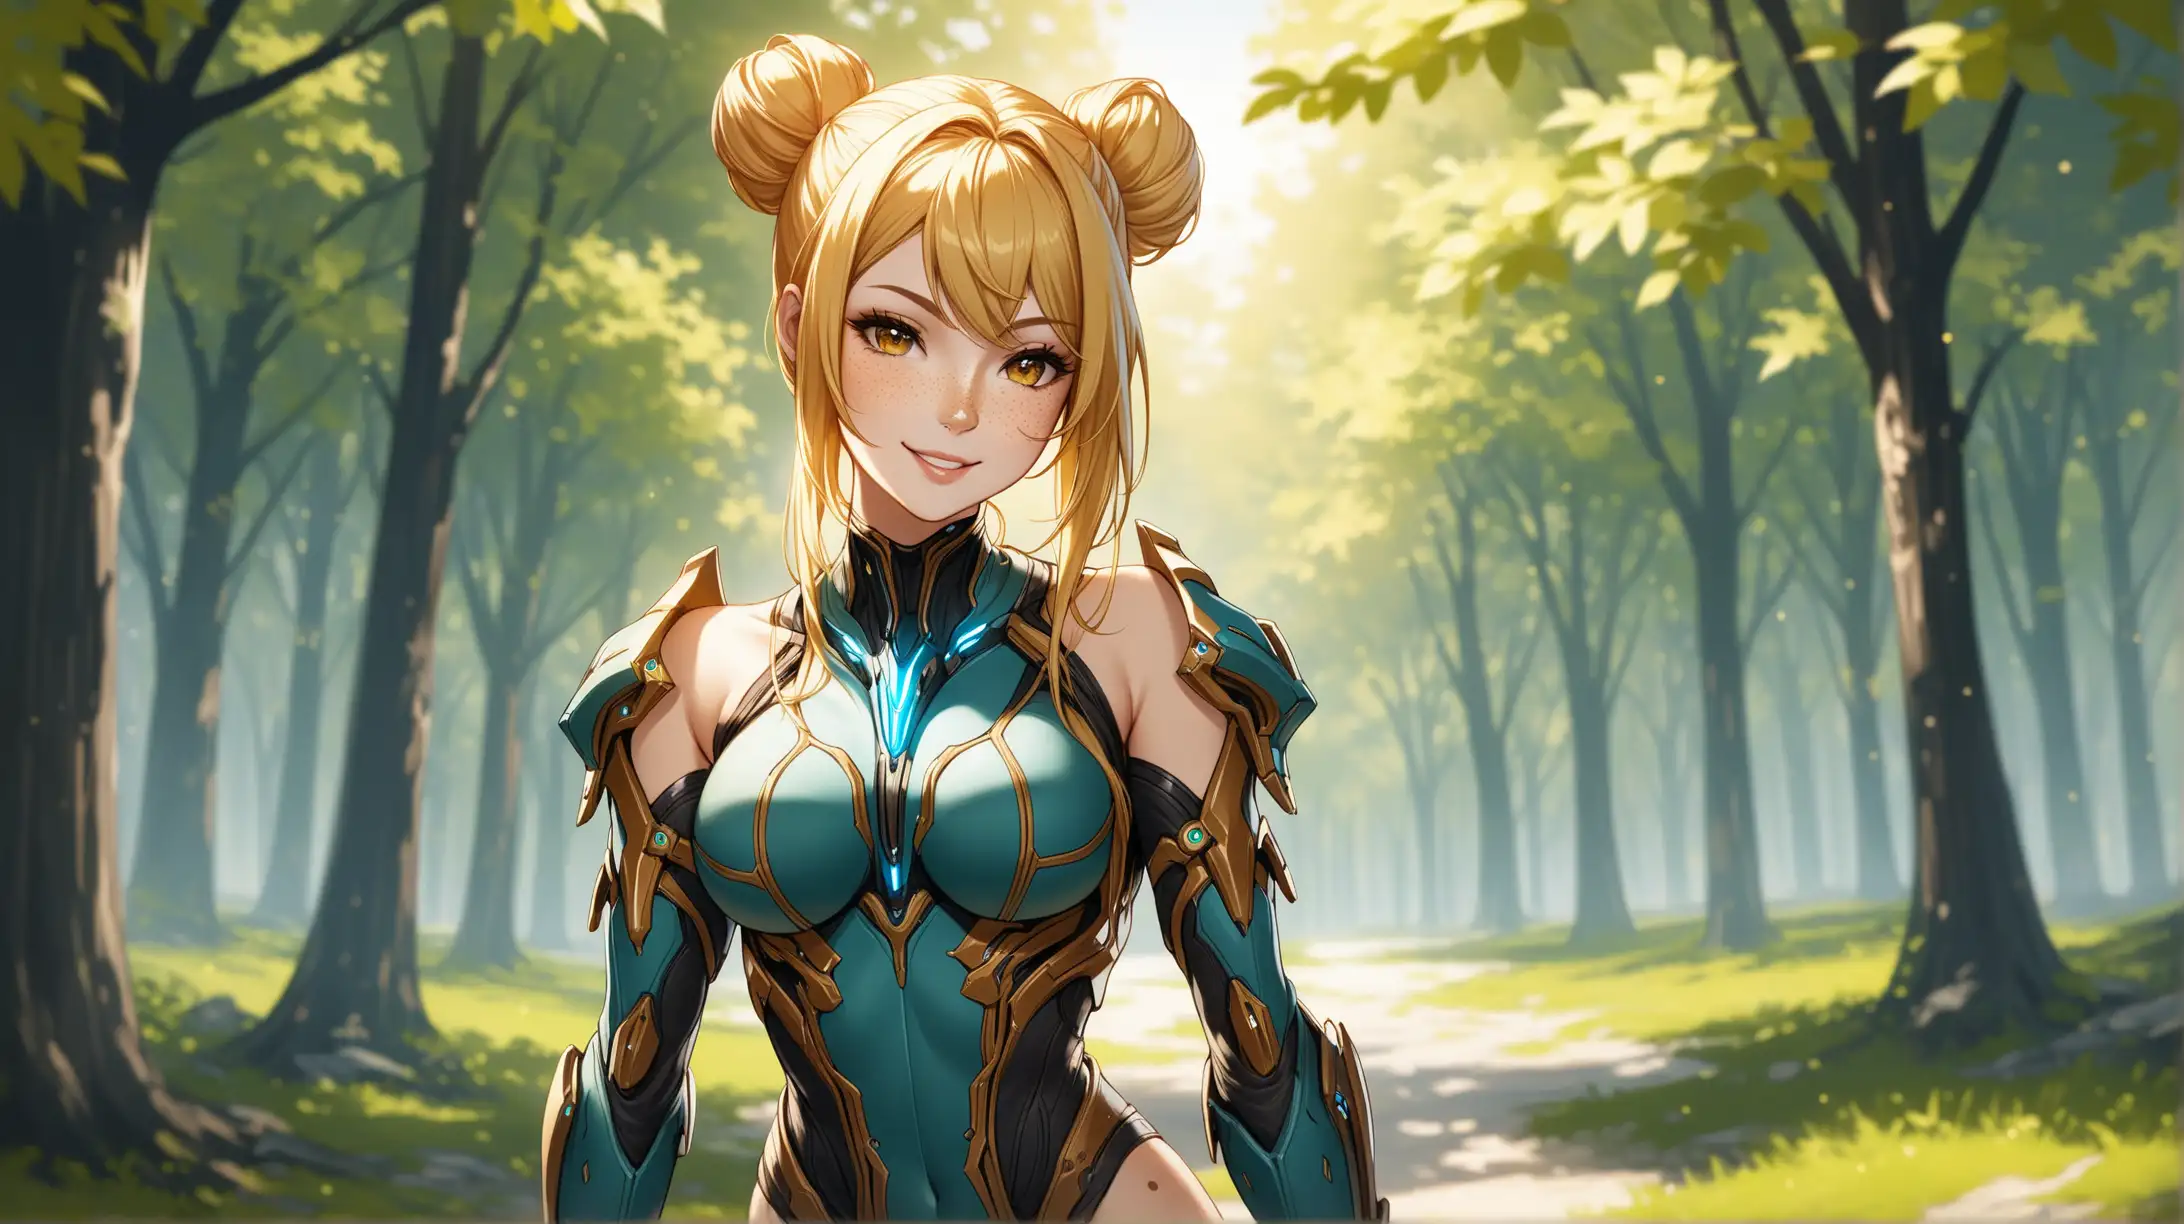 Seductive Blonde Woman with WarframeInspired Outfit Smiling Outdoors